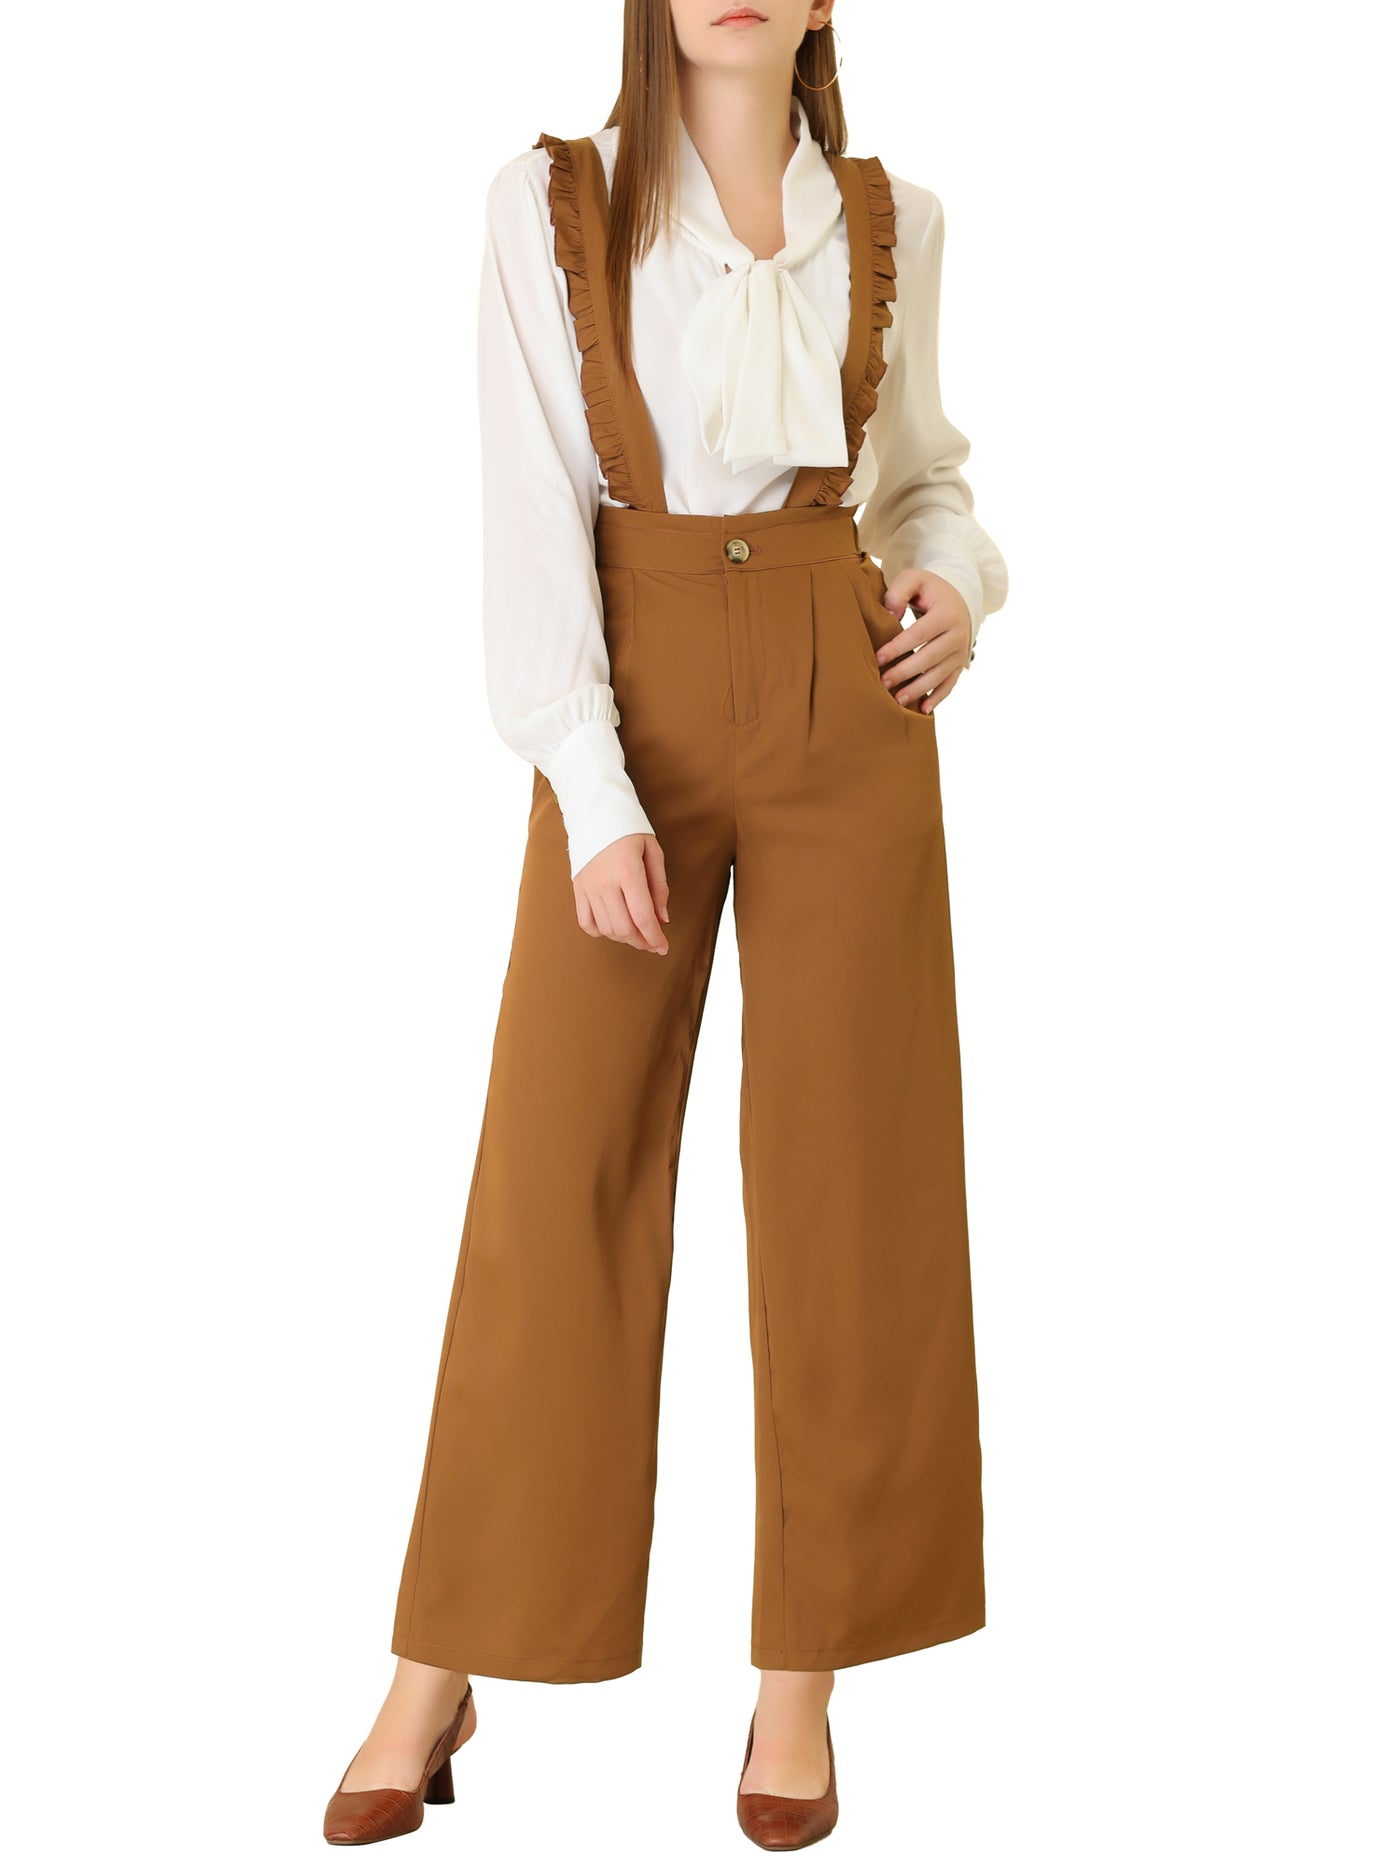 High Waist Ruffled Suspender Overalls Office Wide Leg Ankle Pants